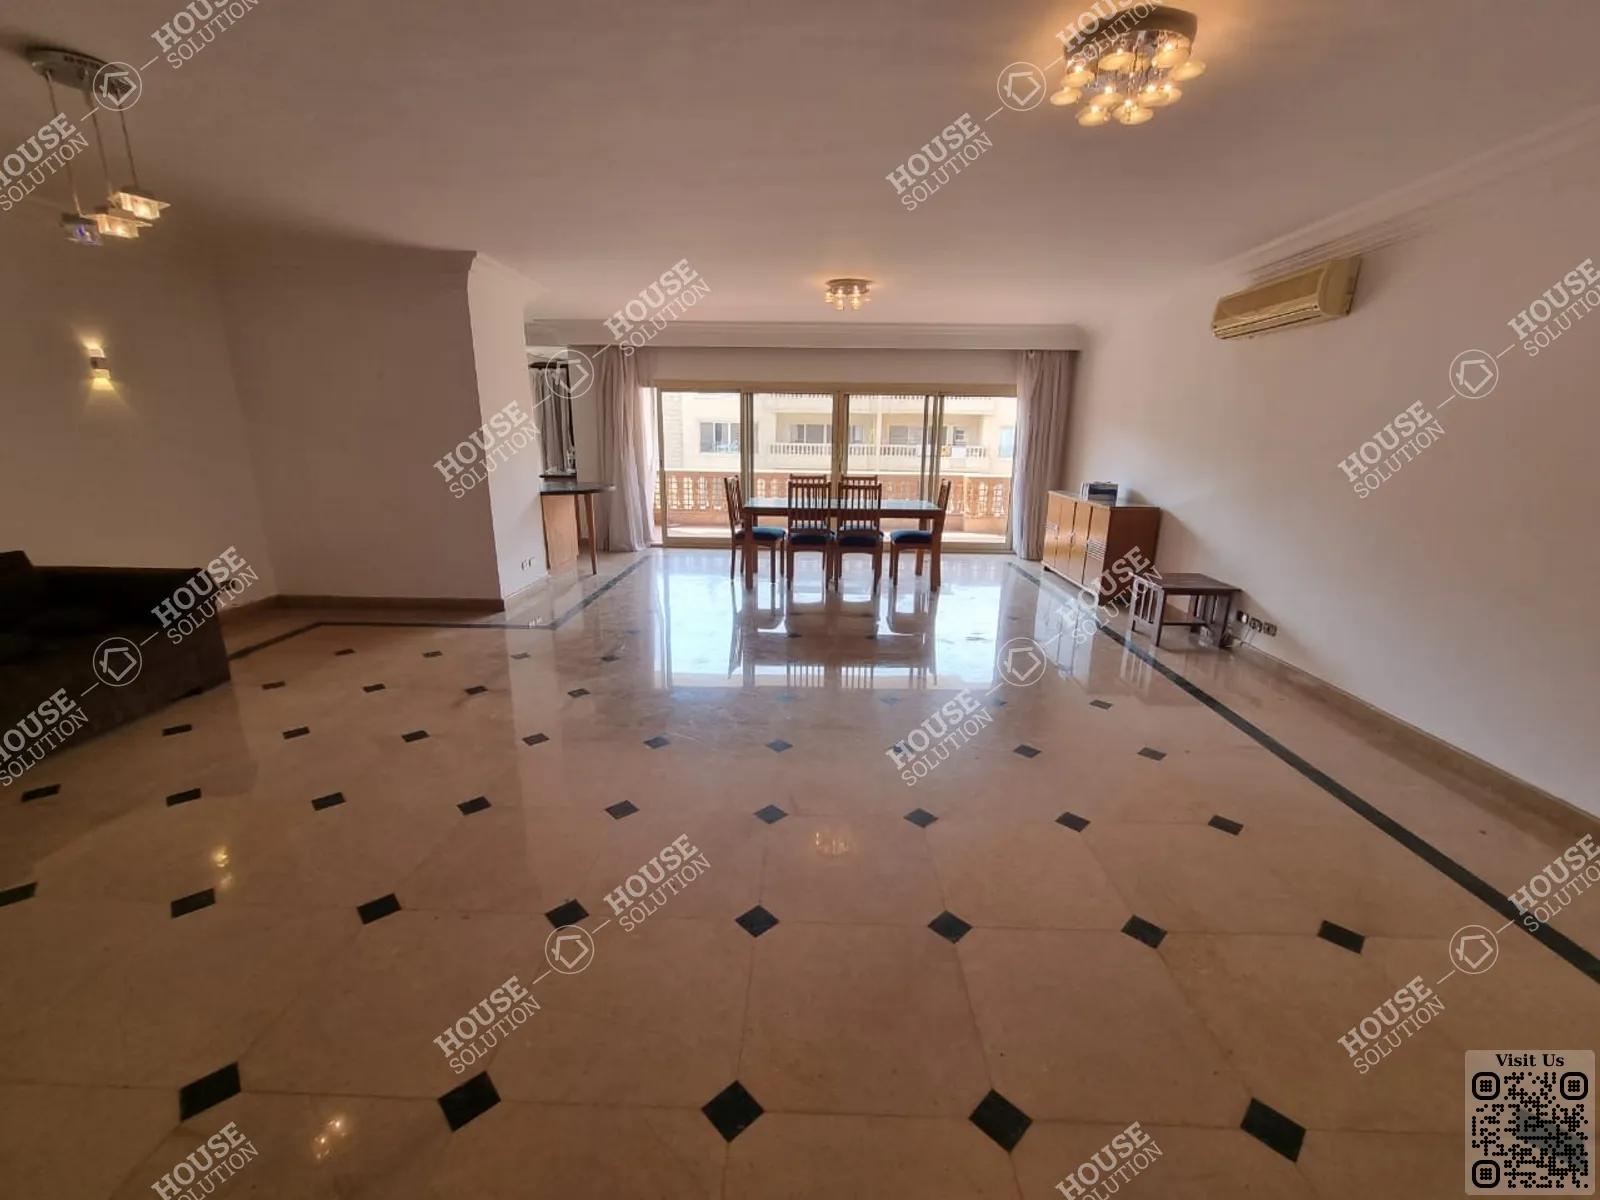 RECEPTION  @ Apartments For Rent In Maadi Maadi Sarayat Area: 265 m² consists of 4 Bedrooms 4 Bathrooms Furnished 5 stars #4234-0